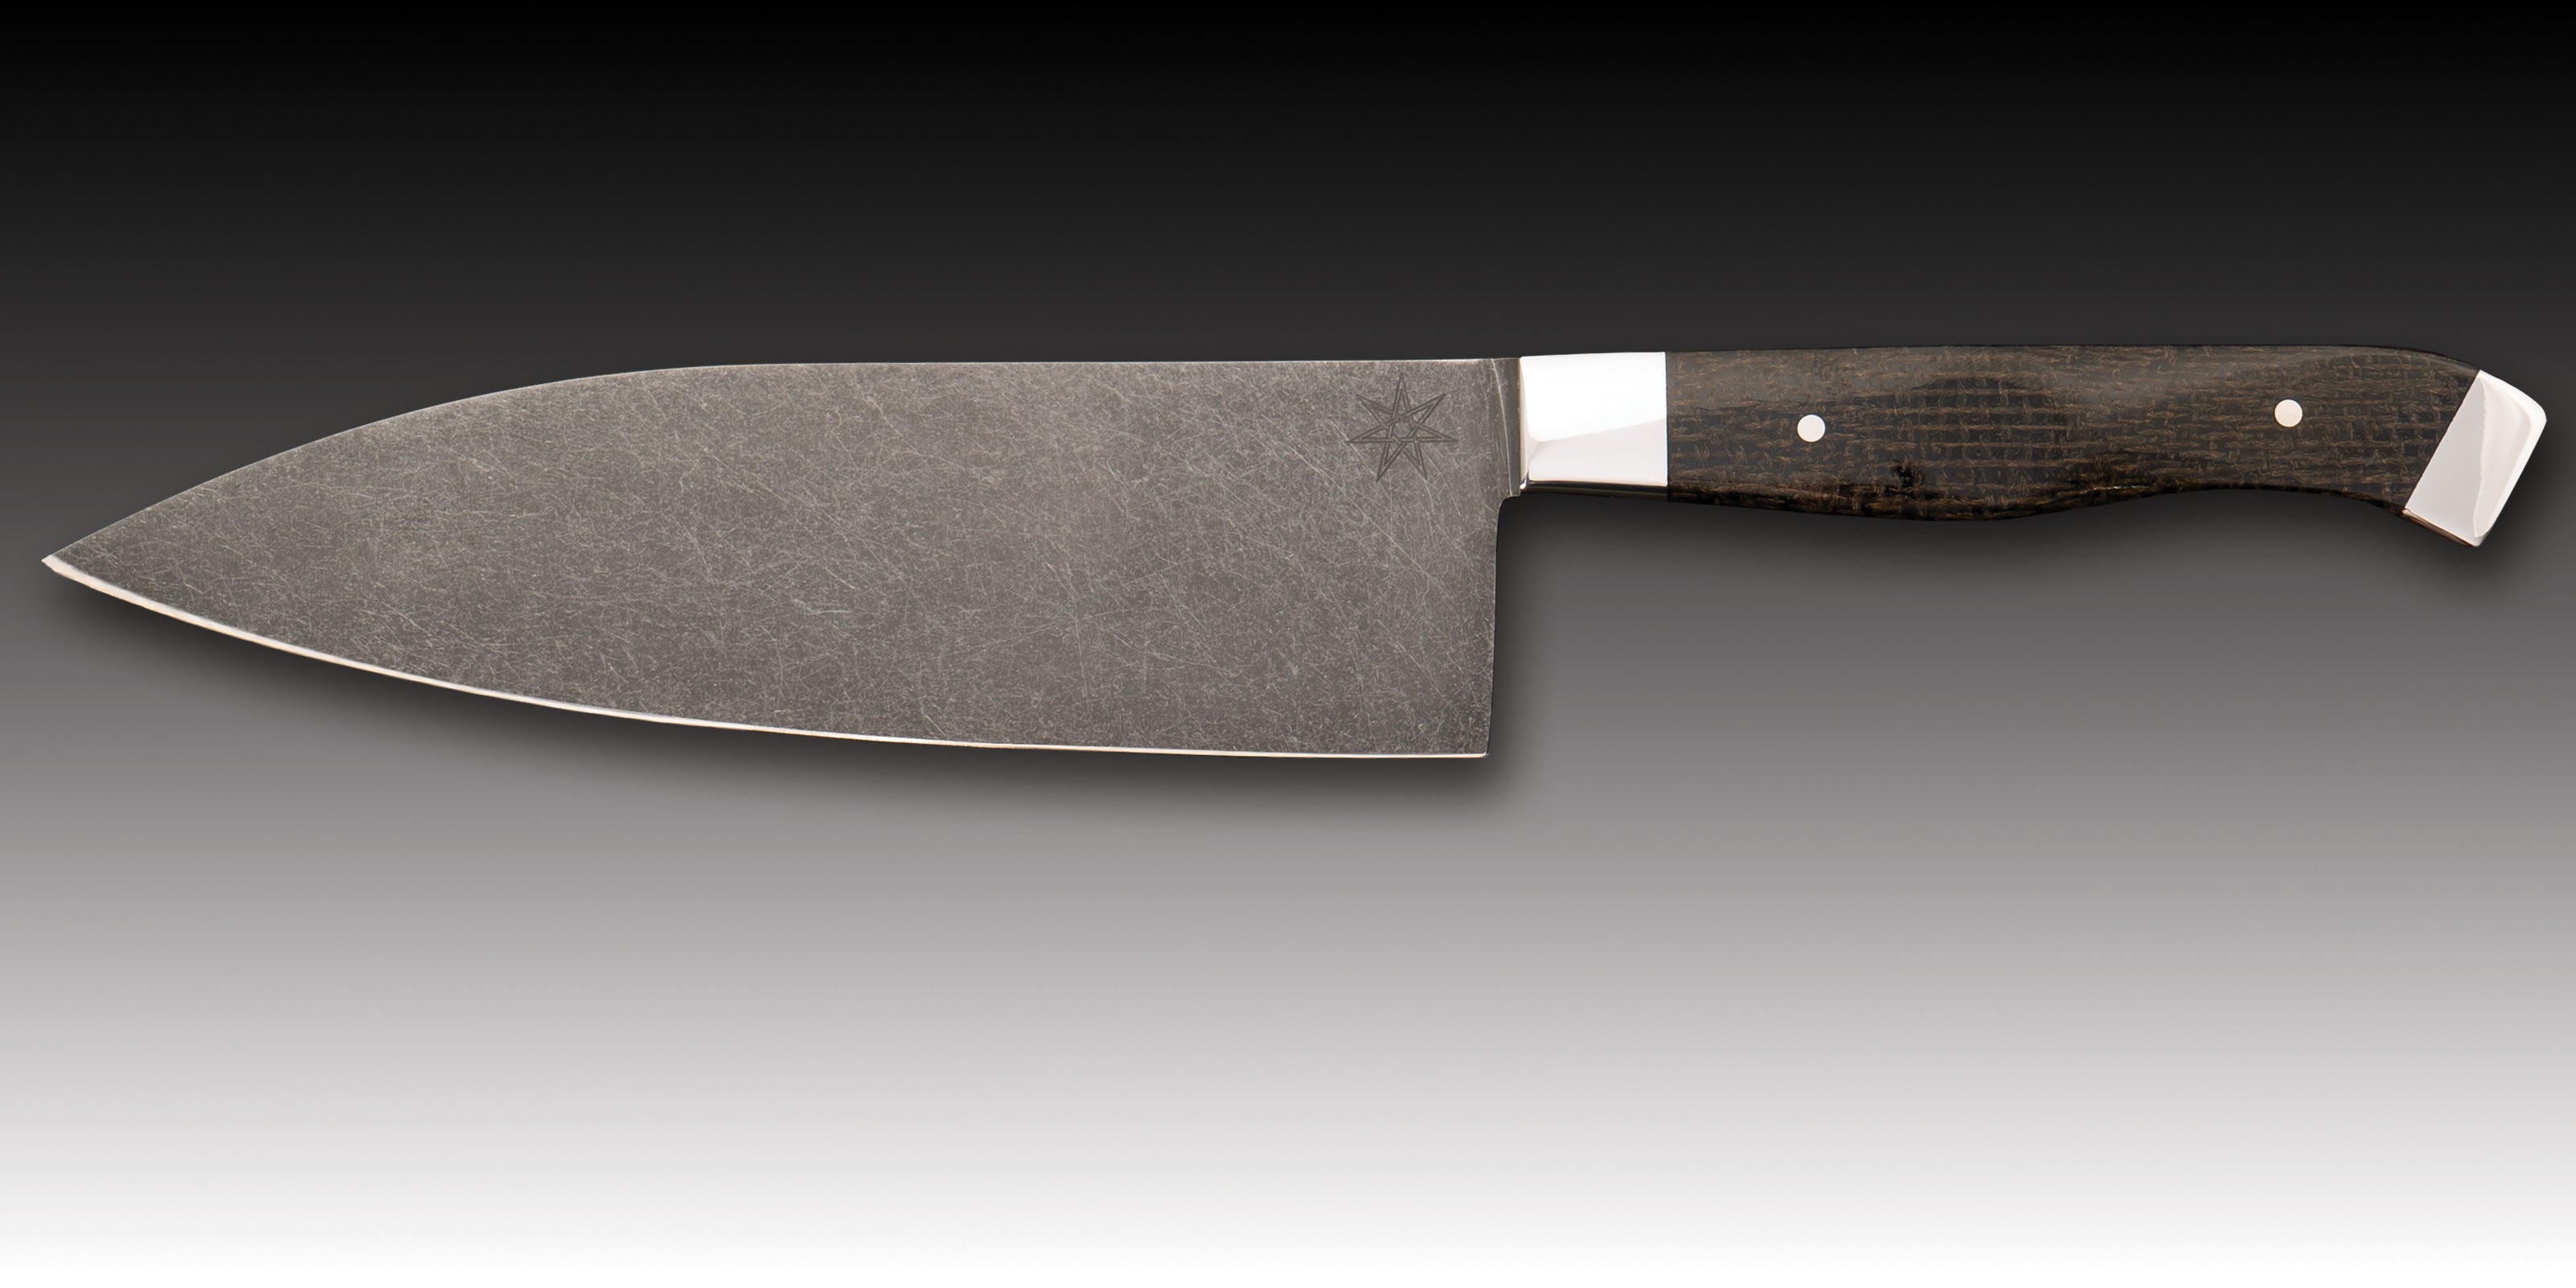 Town Cutler Limited-Edition Carbon Pommel Steel Knife with Stonewash Finish Blade, Black Burlap Micarta Handle, Stainless Steel Bolster and Pommel